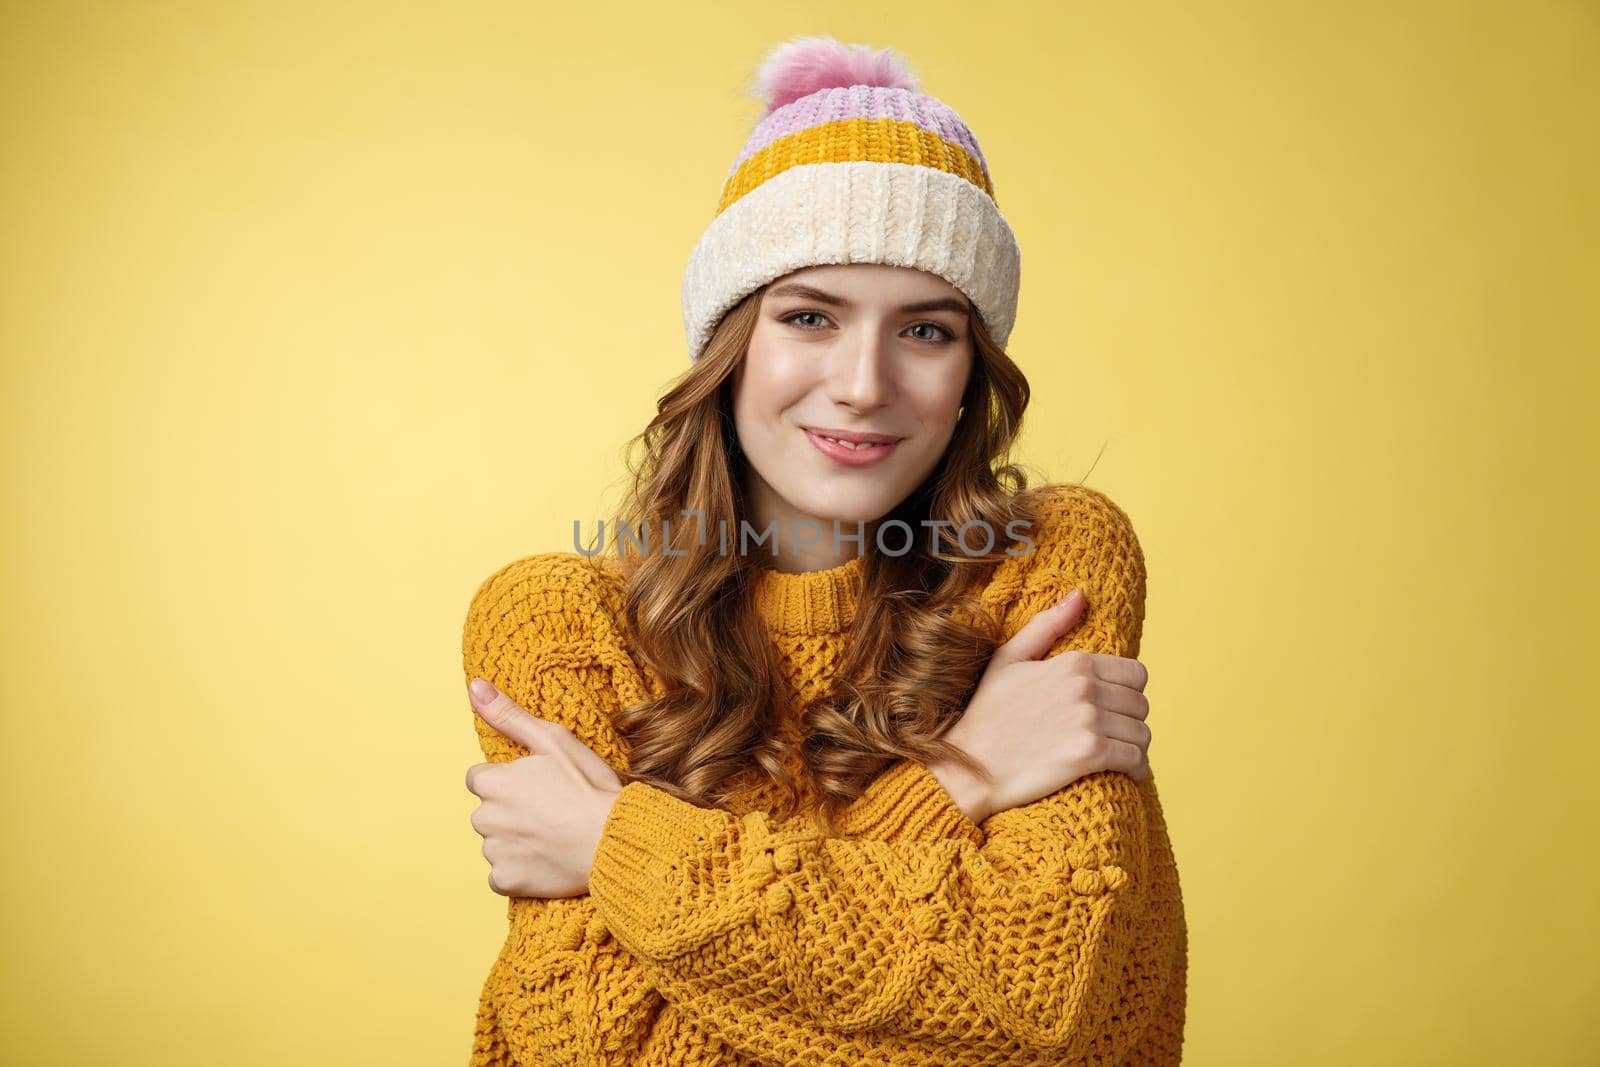 Attractive feminine tender young woman feel cozy, embracing herself smiling delighted cute, wearing comfortable warm sweater trendy hat cuddling, dreaming boyfriend hugs, stand yellow background.